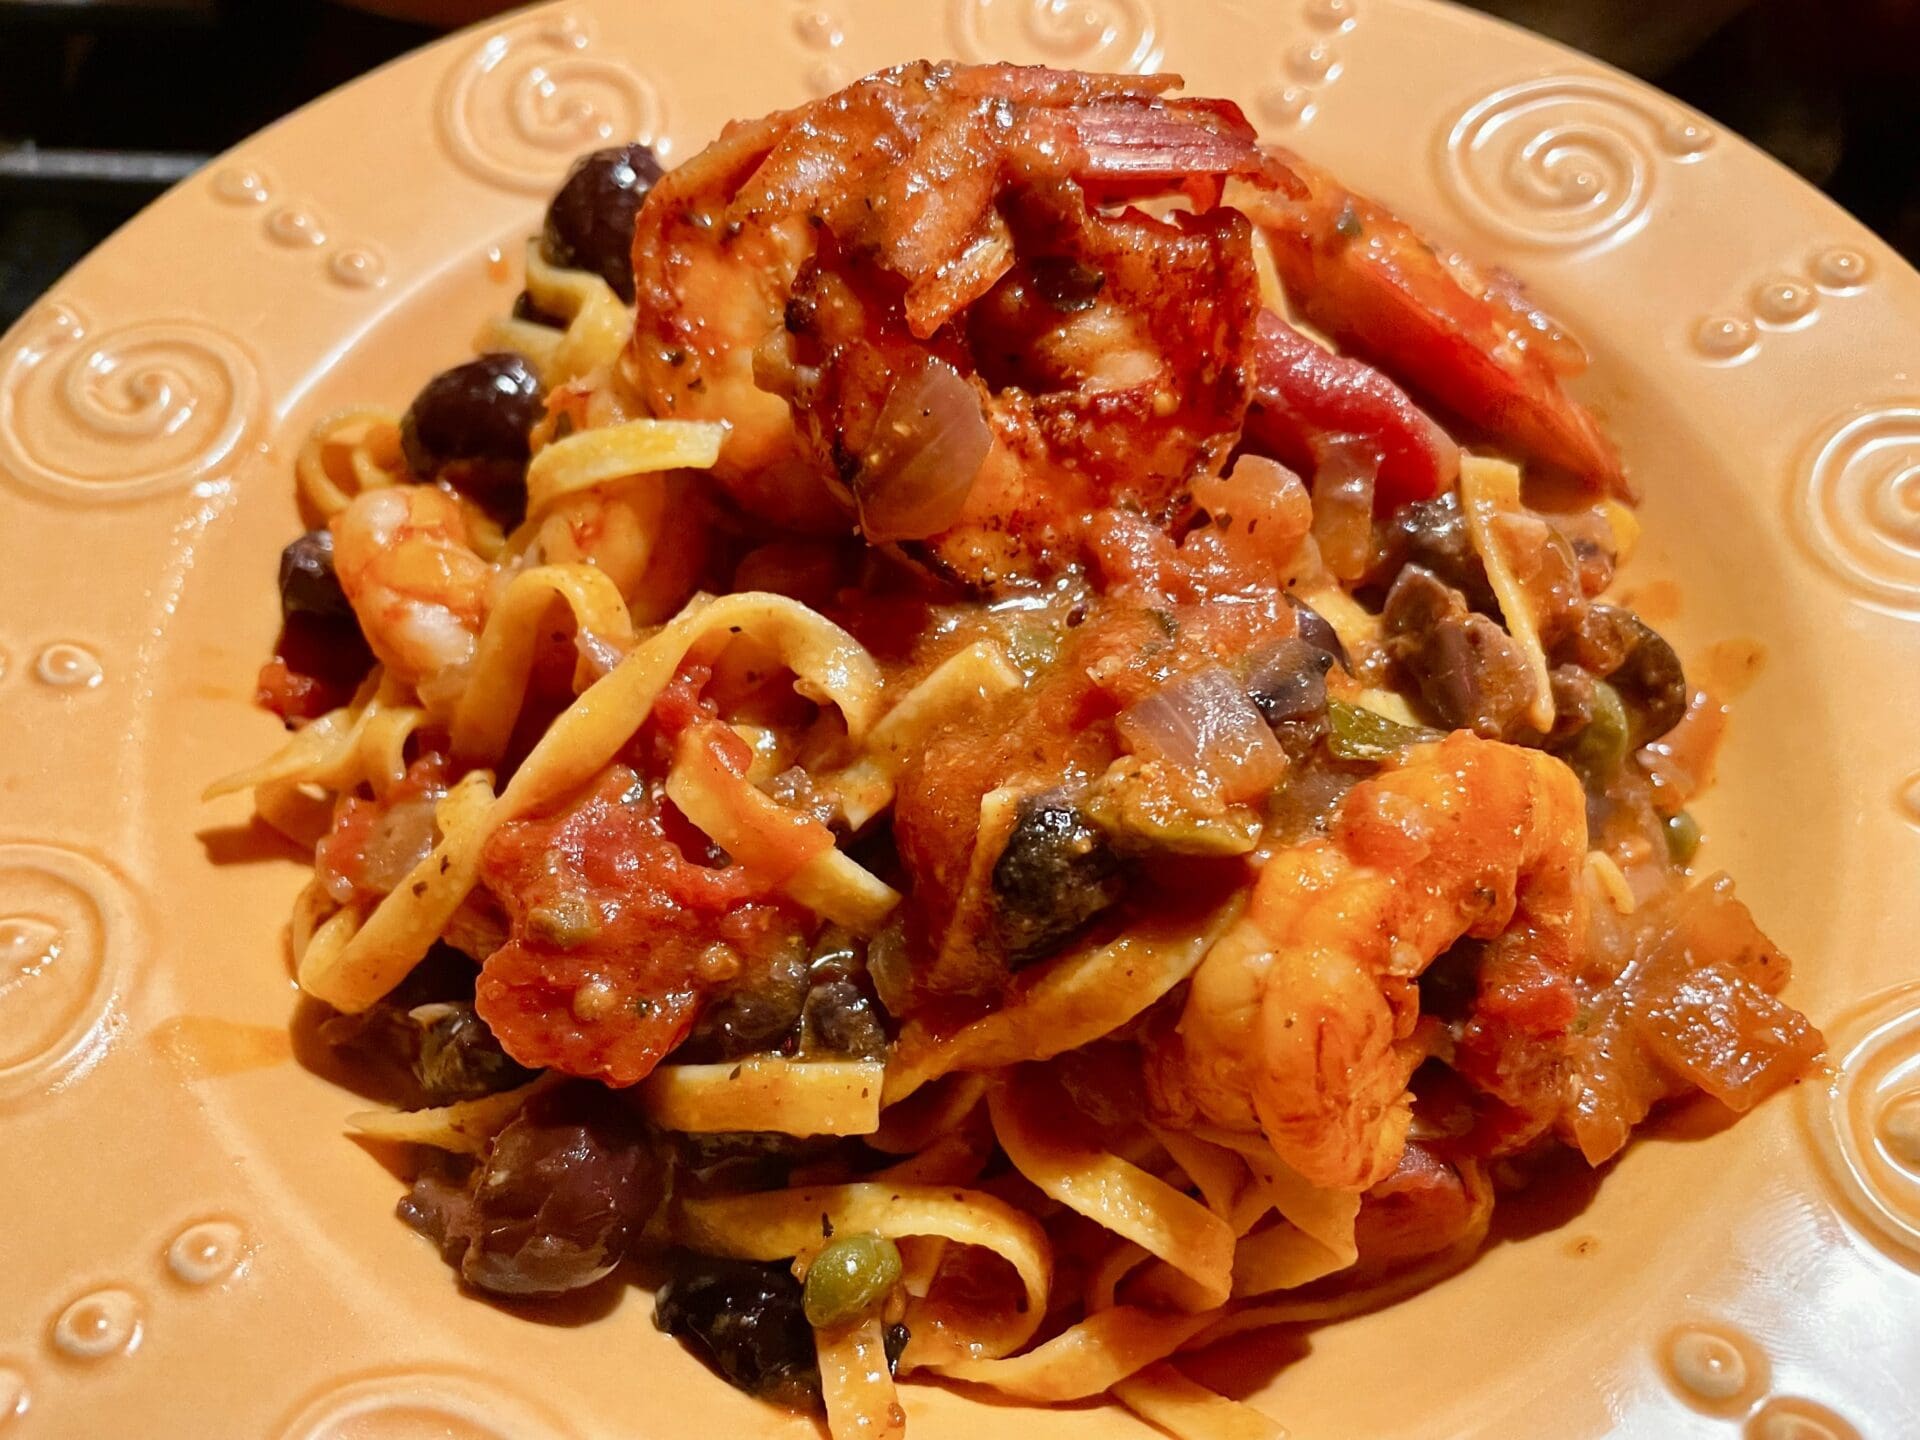 A plate of pasta with shrimp, olives and tomatoes.